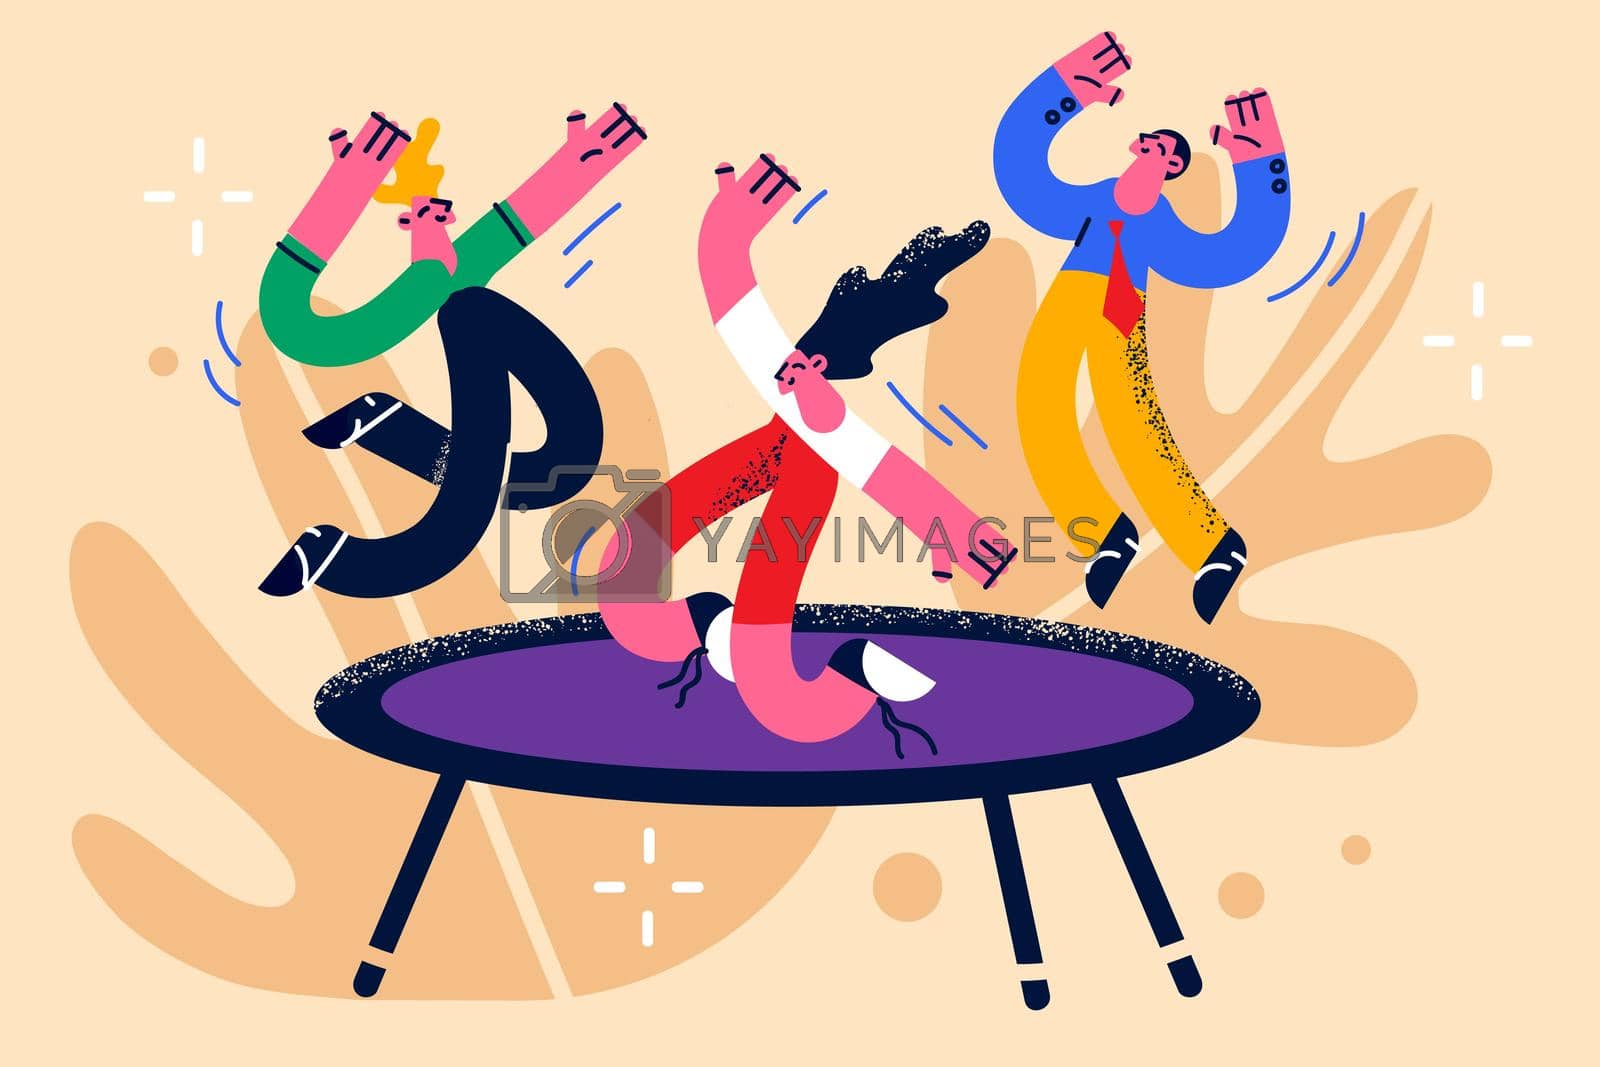 Children activities and having fun concept. Group of happy kids jumping on trampoline feeling positive having fun together vector illustration